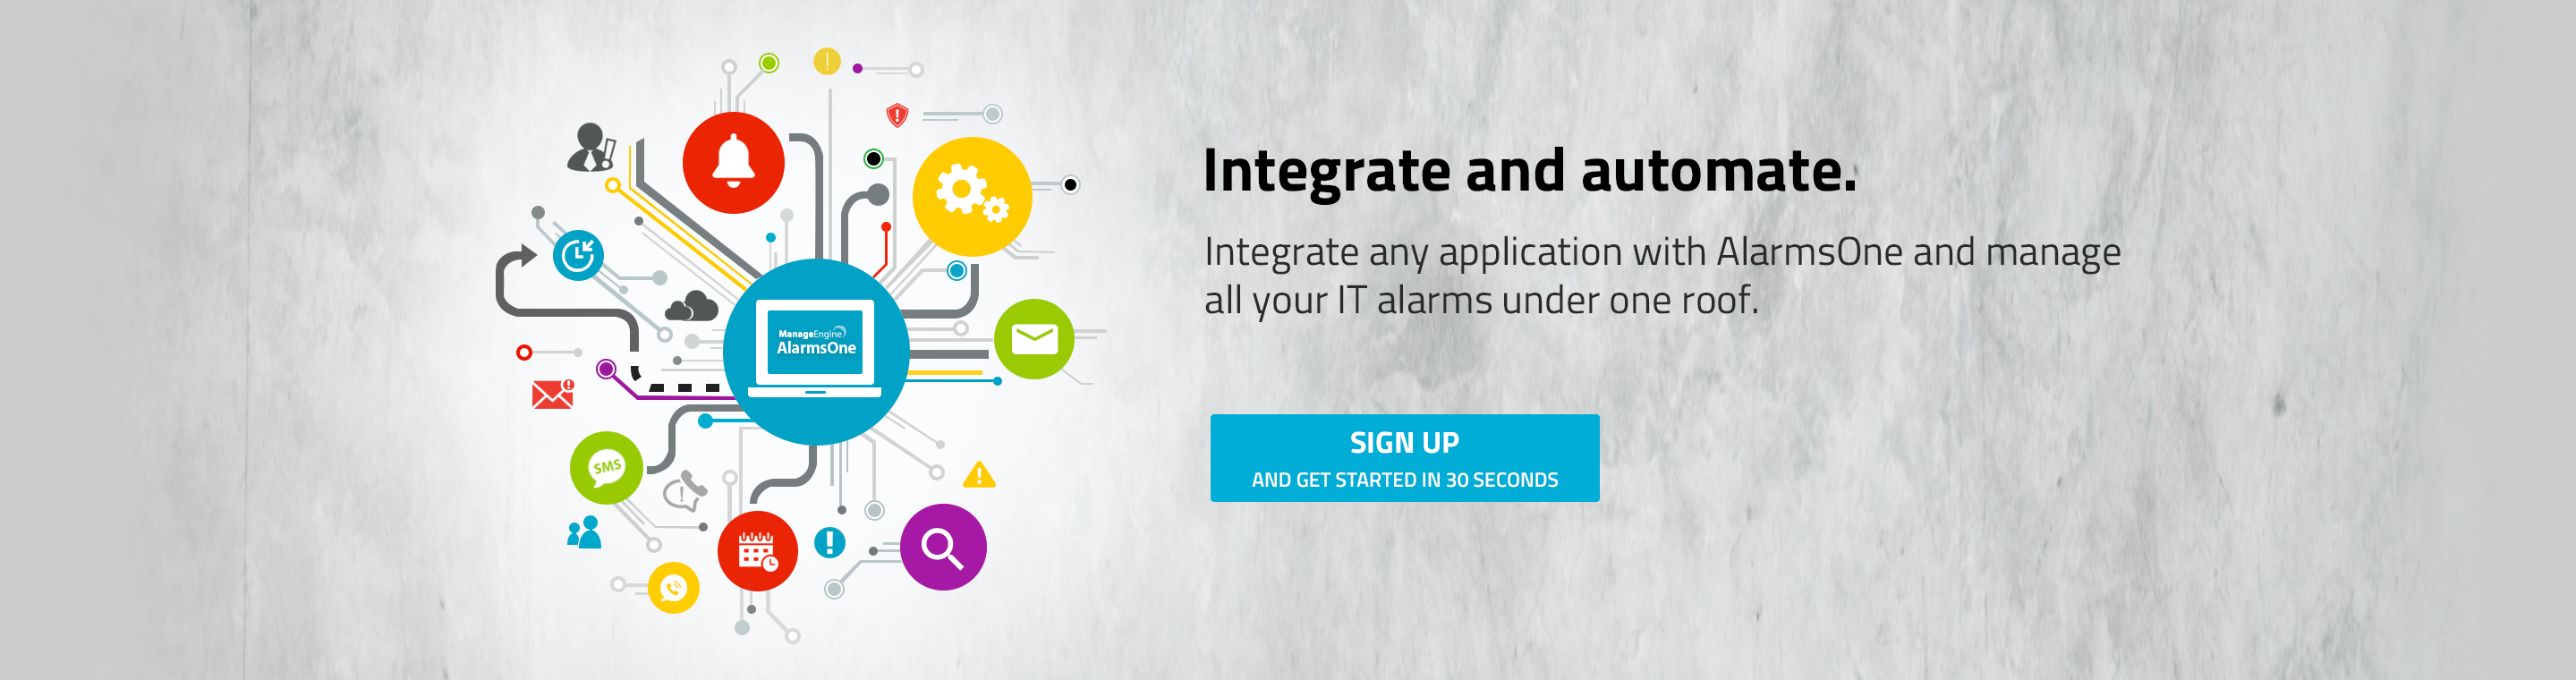 Integrate any application with AlarmsOne